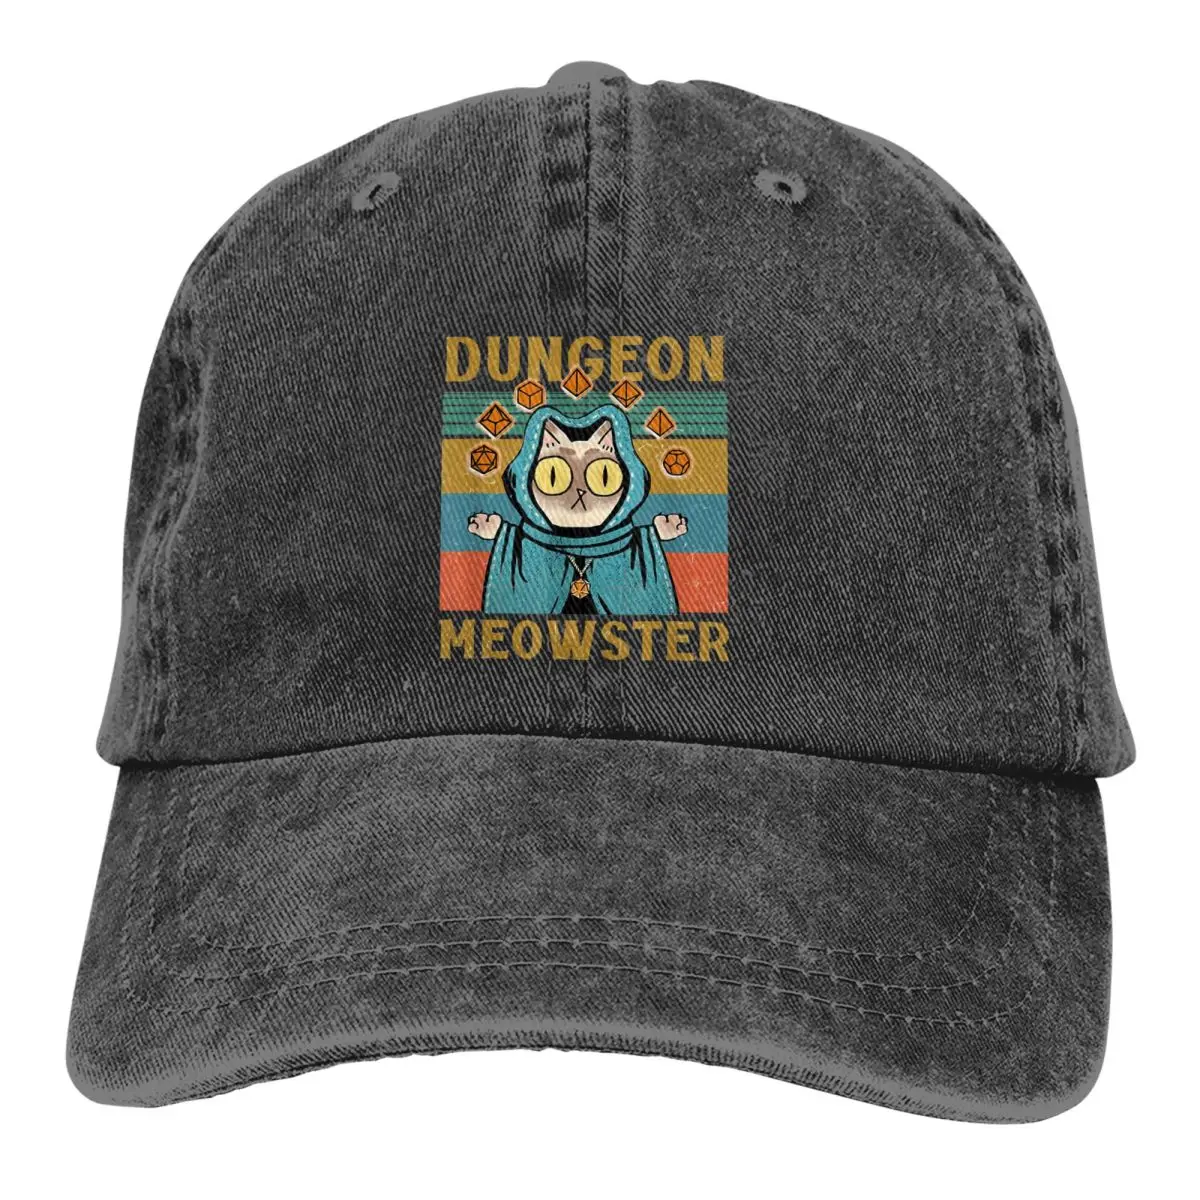 

Washed Men's Baseball Cap Dungeon Meowster Funny Nerdy Trucker Snapback Caps Dad Hat DnD Game Golf Hats